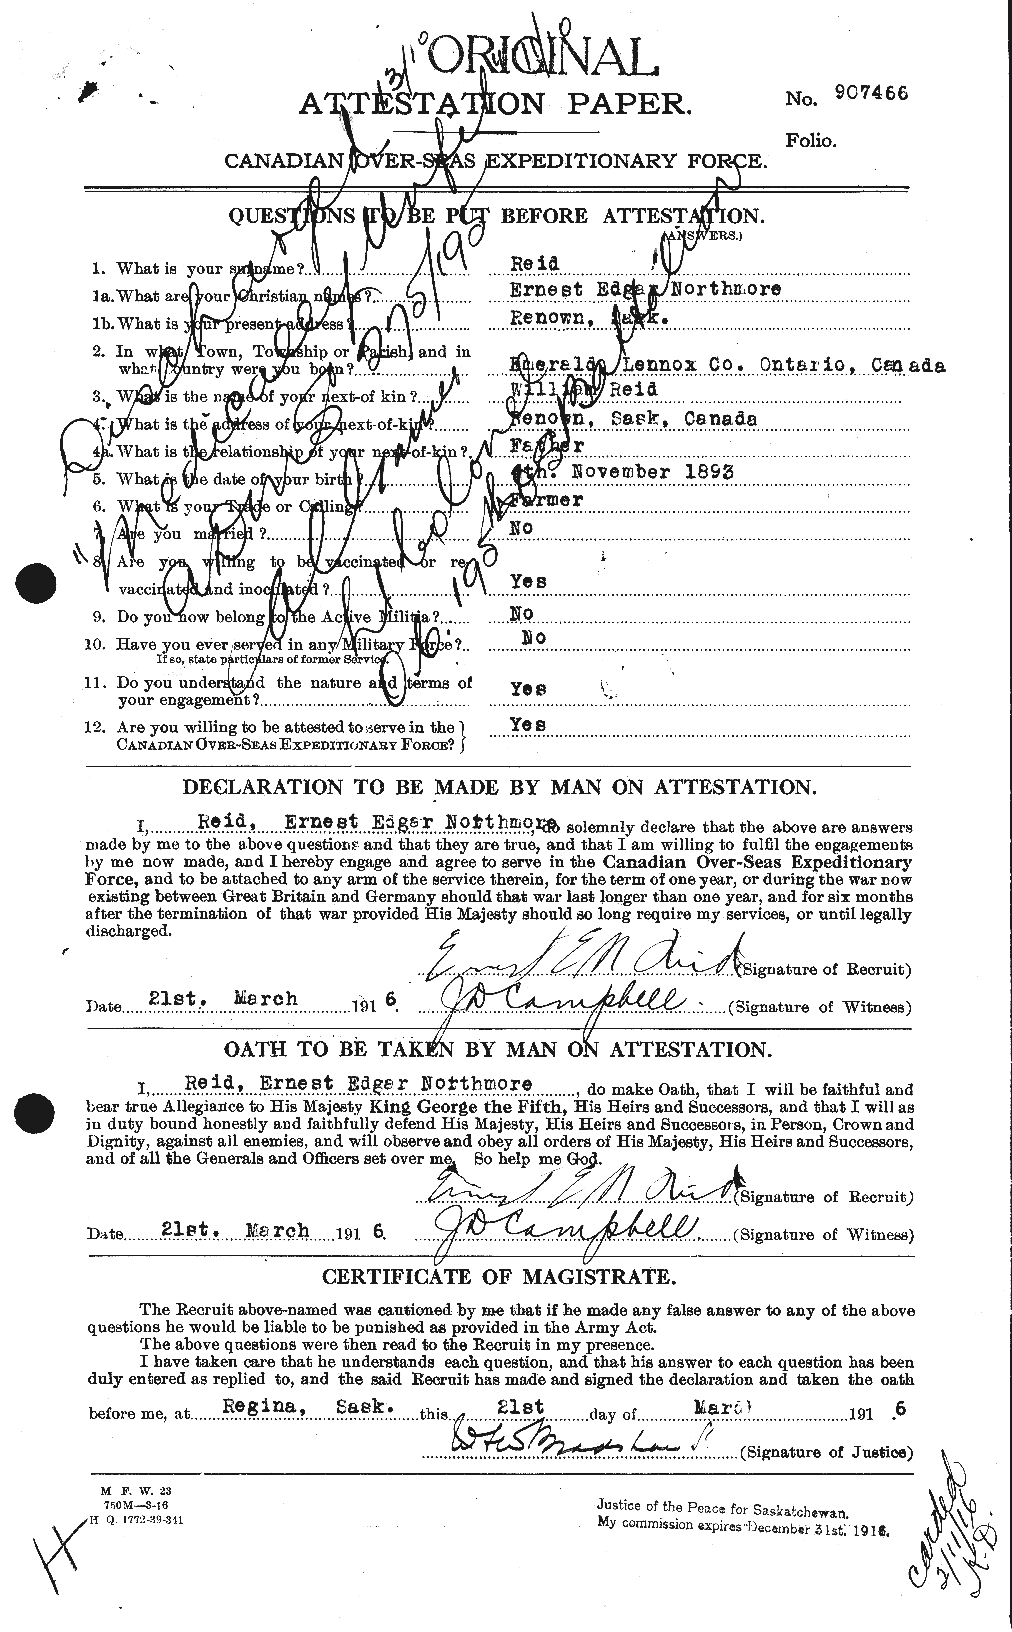 Personnel Records of the First World War - CEF 598016a